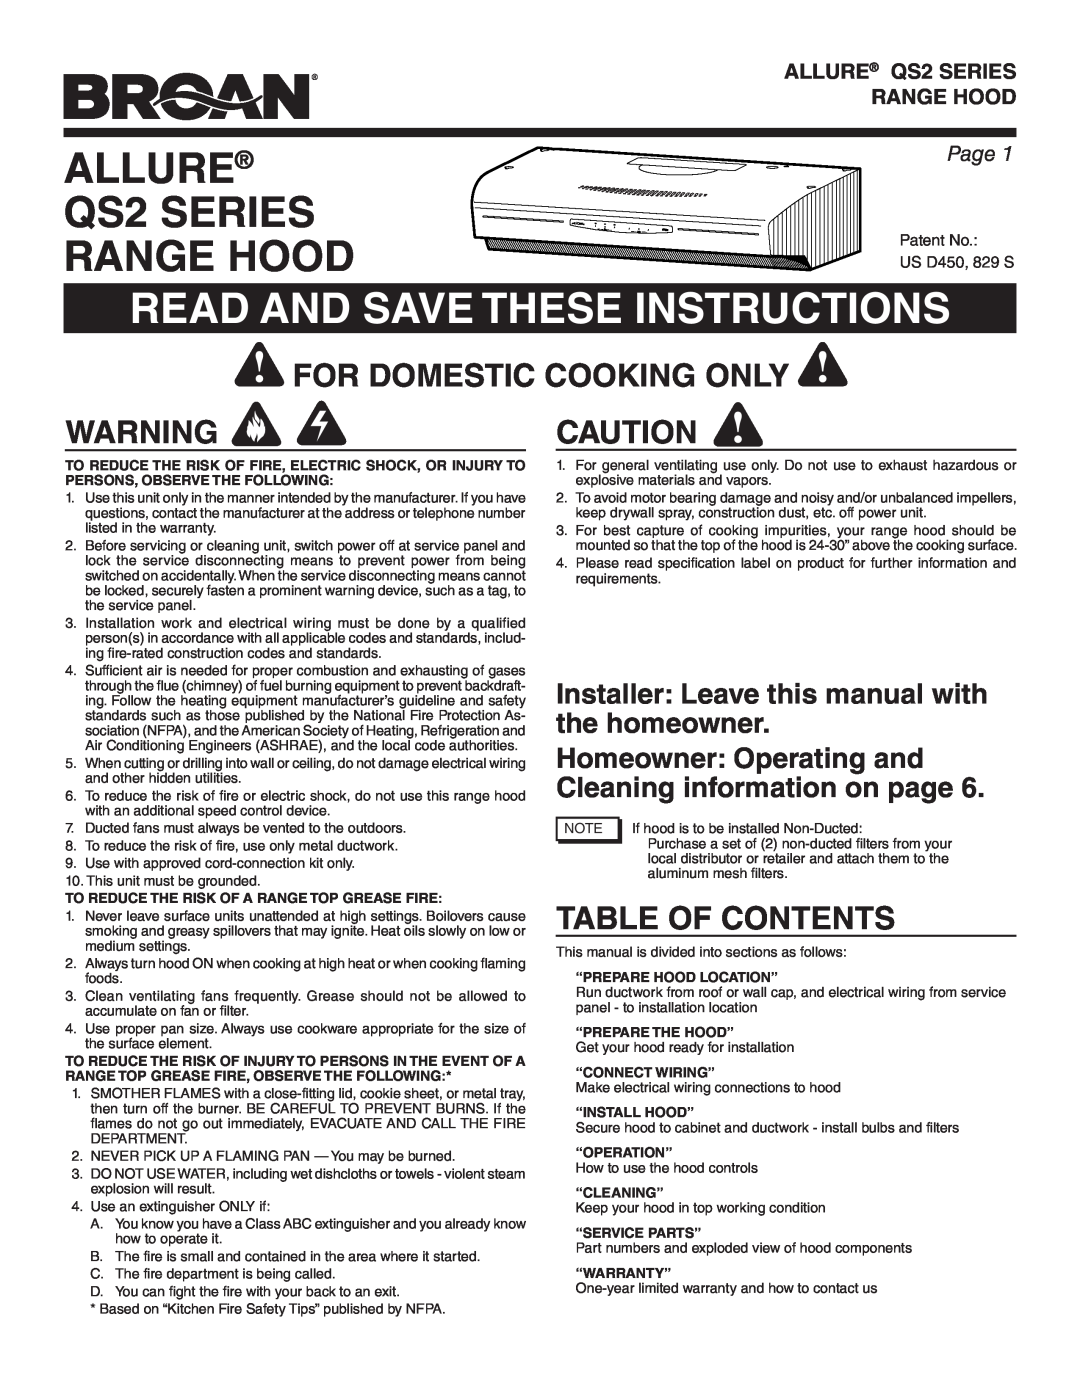 Broan QS236BL warranty Allure, QS2 SERIES, Range Hood, Read And Save These Instructions, For Domestic Cooking Only, Page 